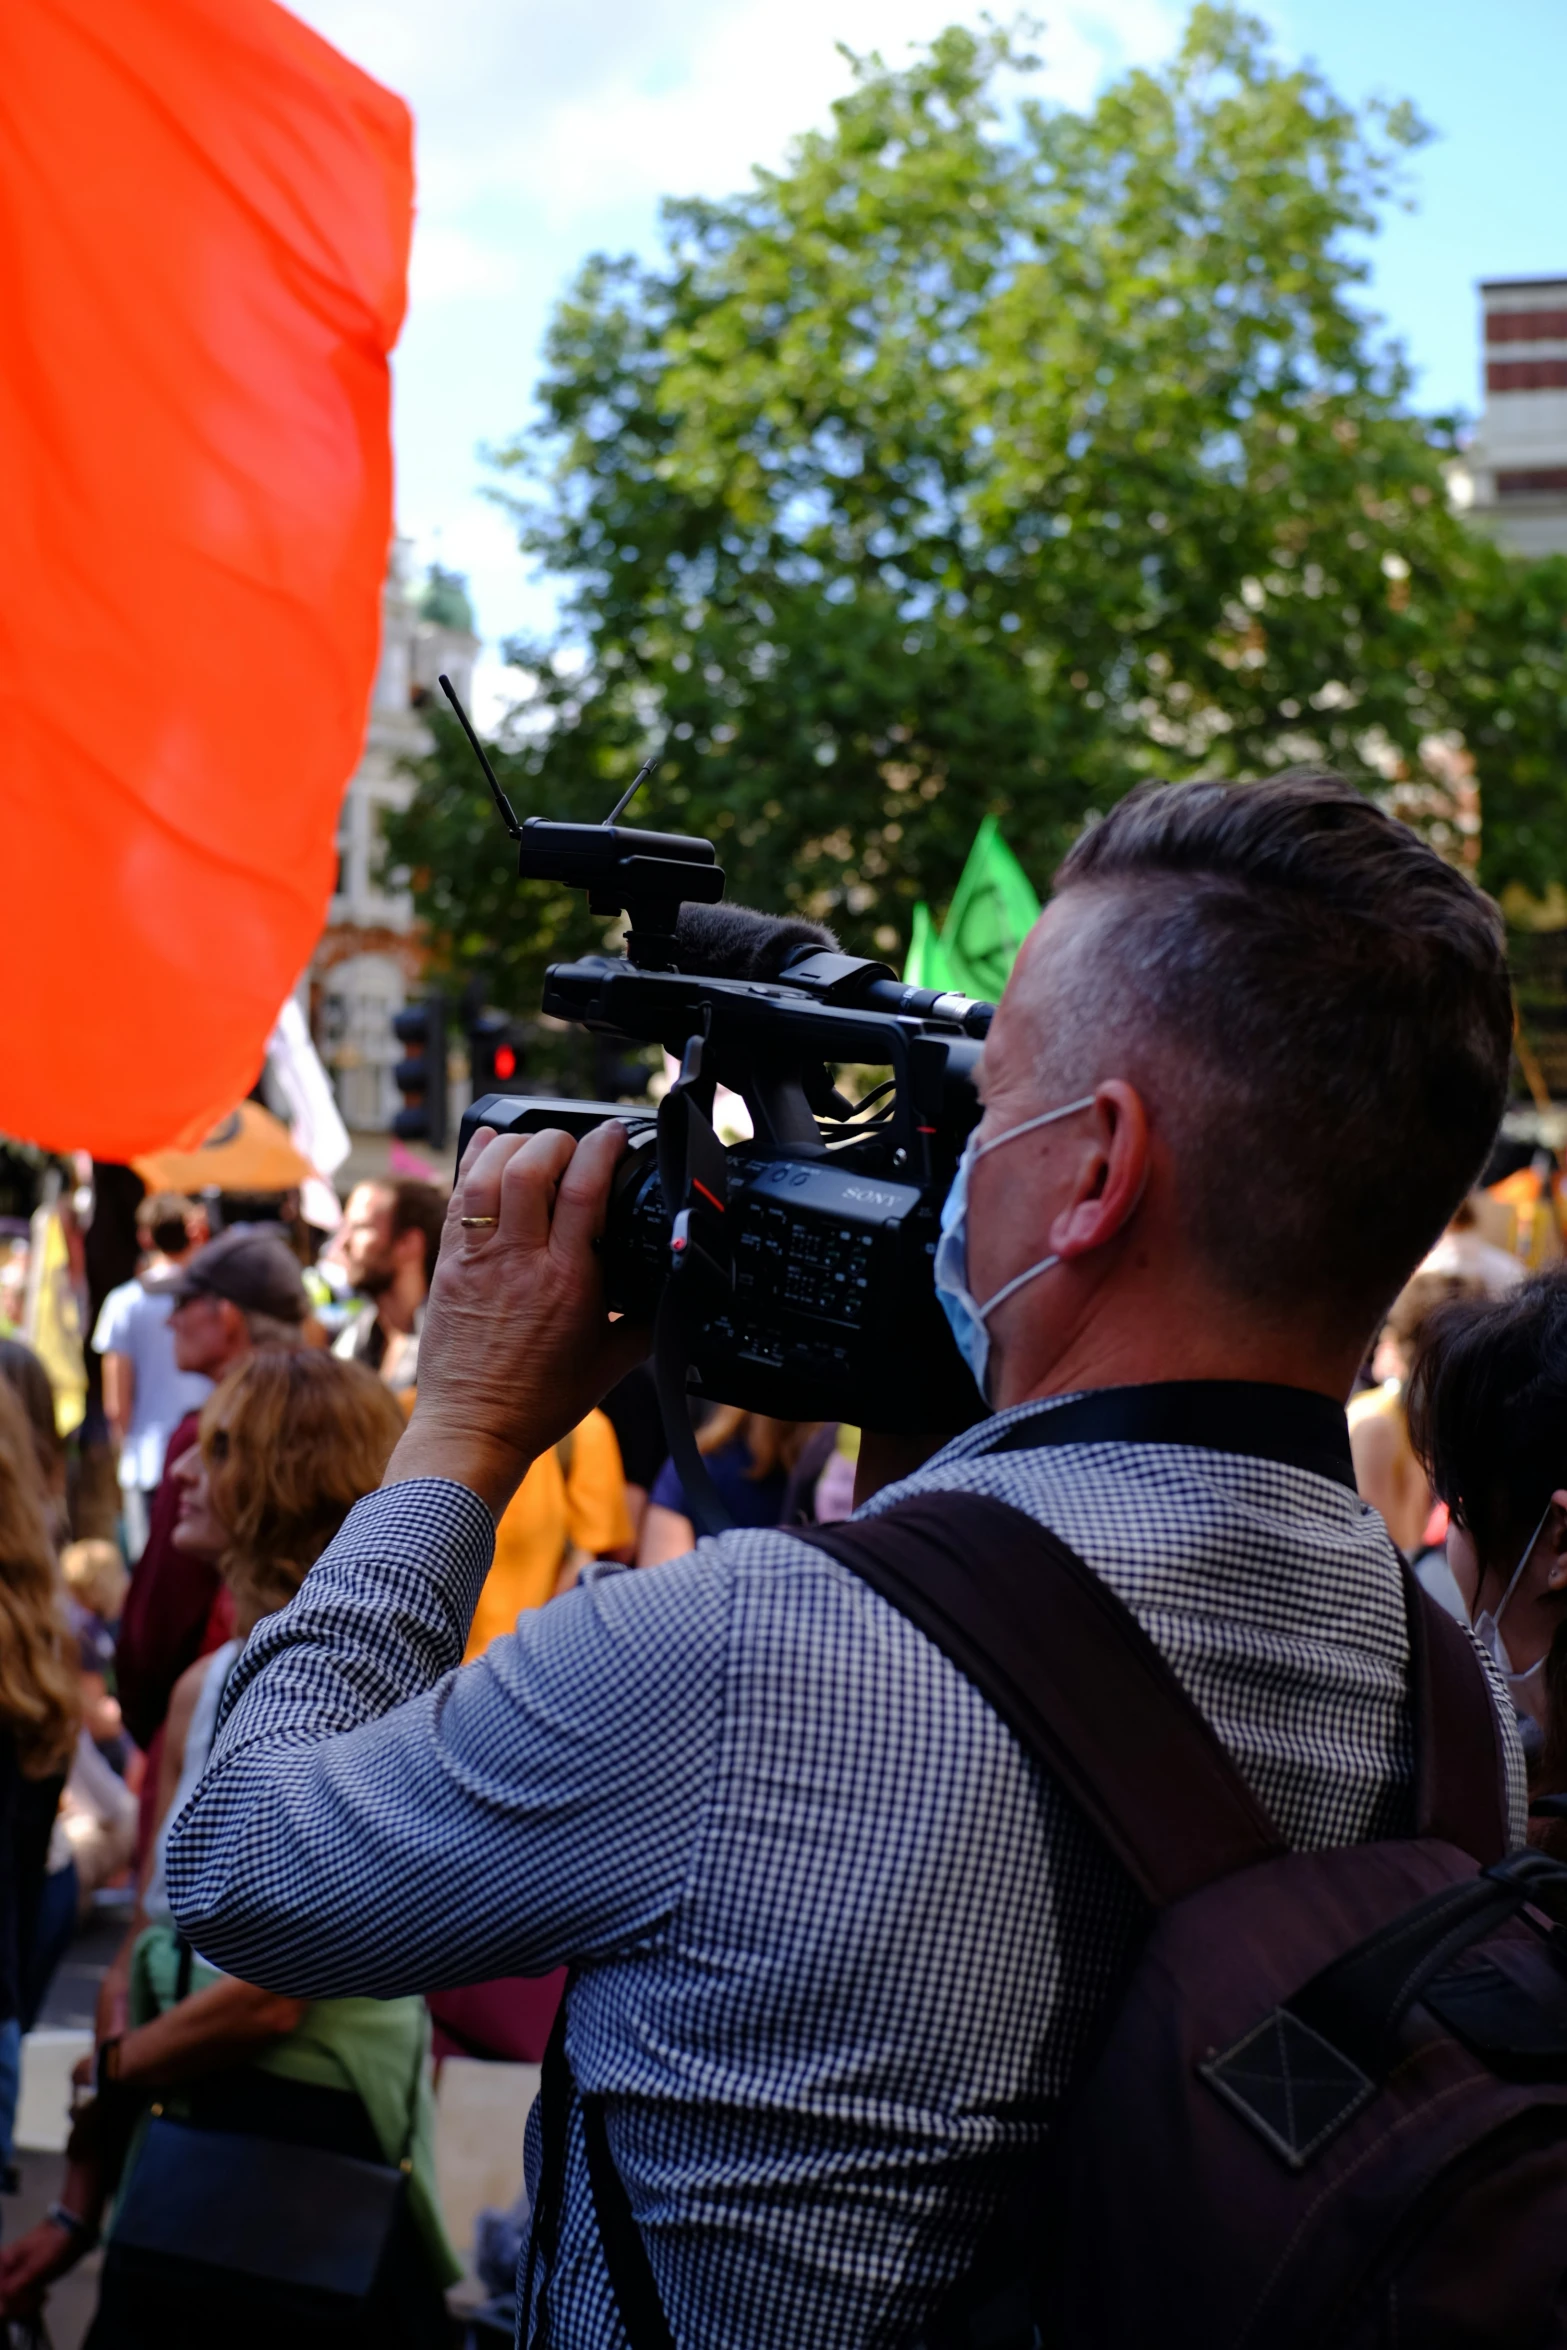 a man with a camera next to a crowd